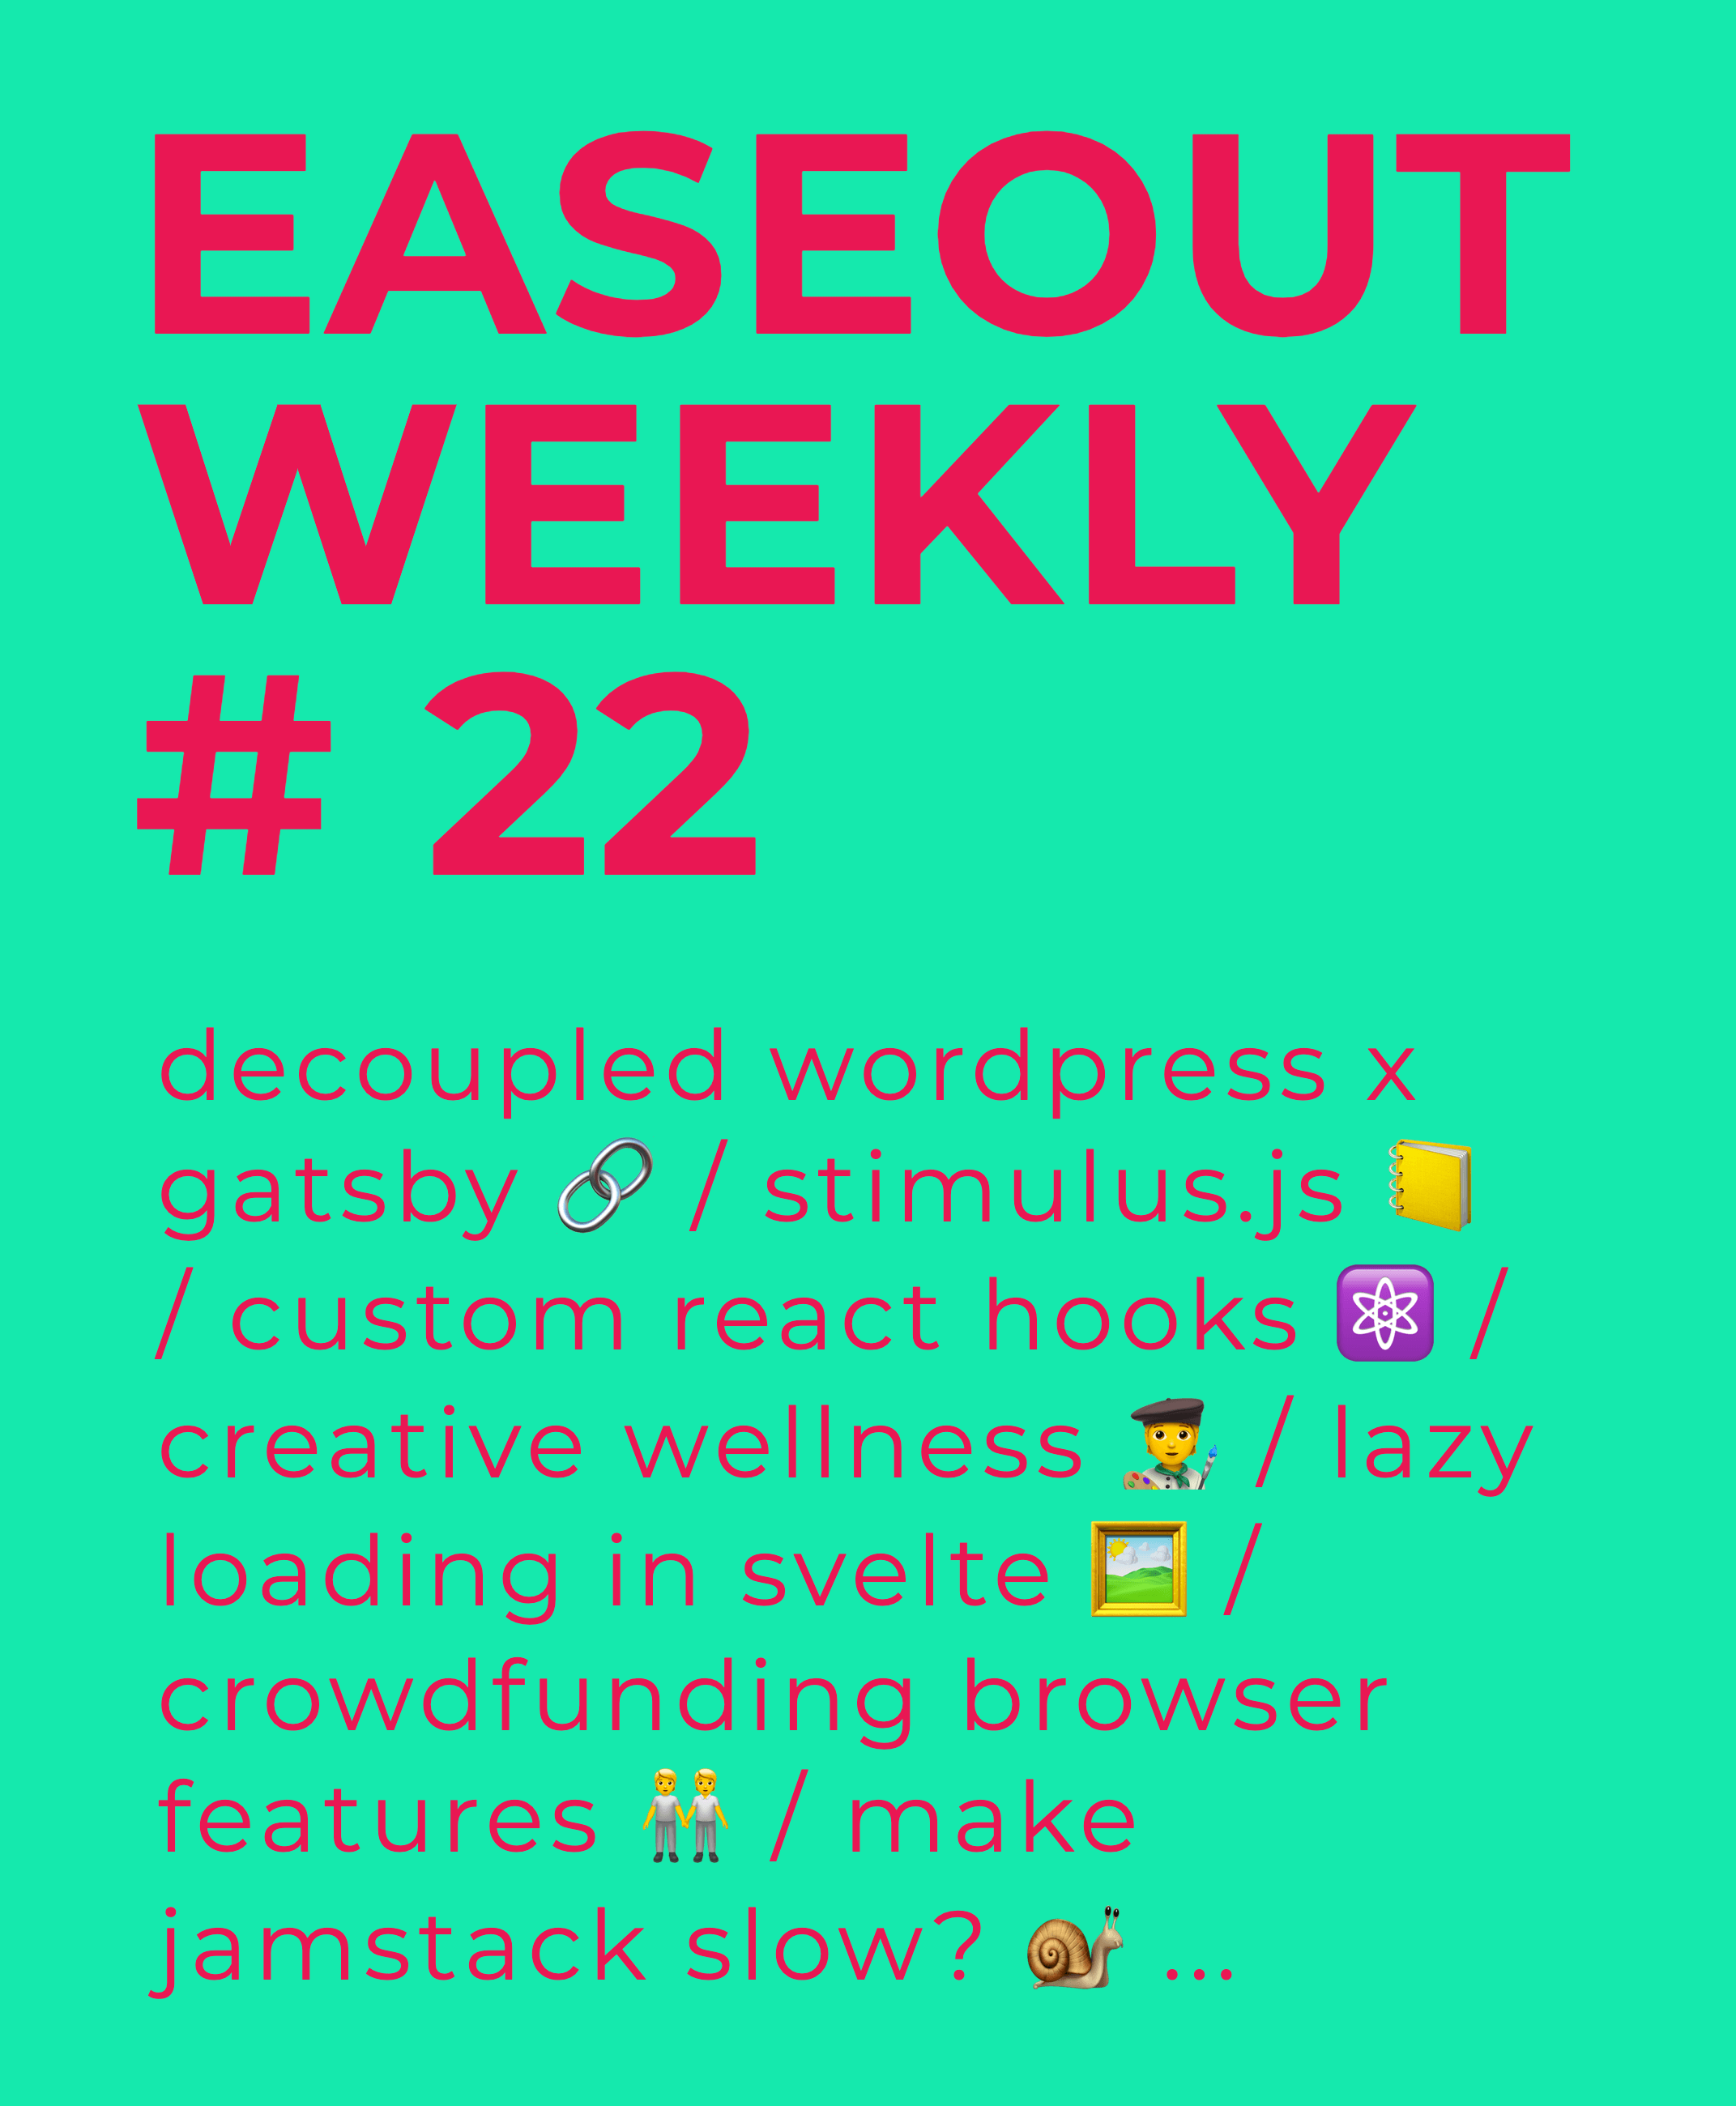 Easeout Weekly #22